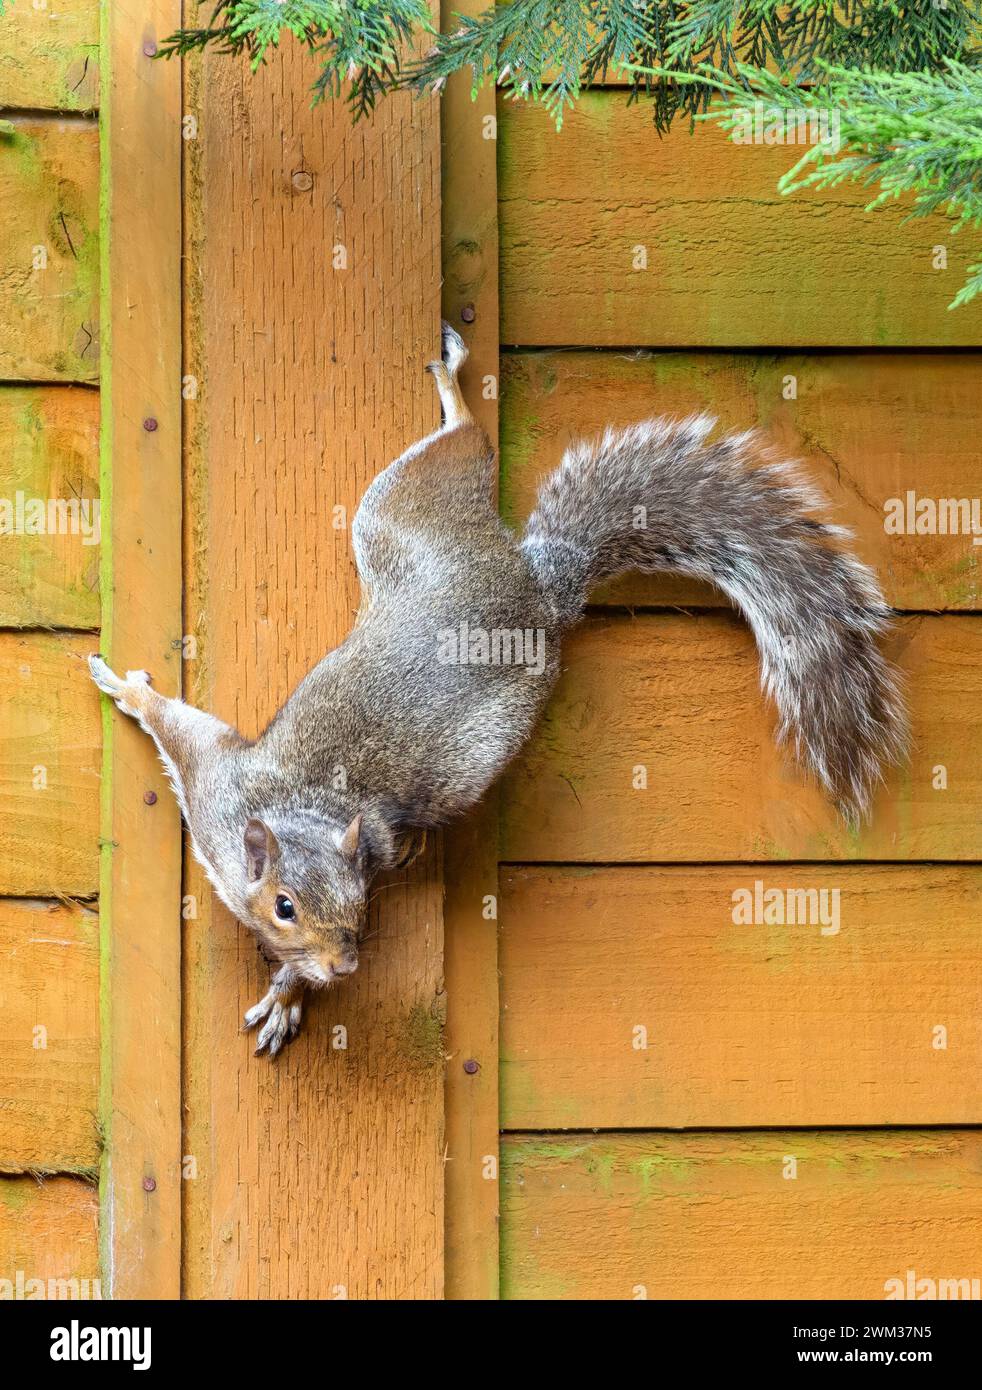 Grey Squirrel climbing down fence Stock Photo